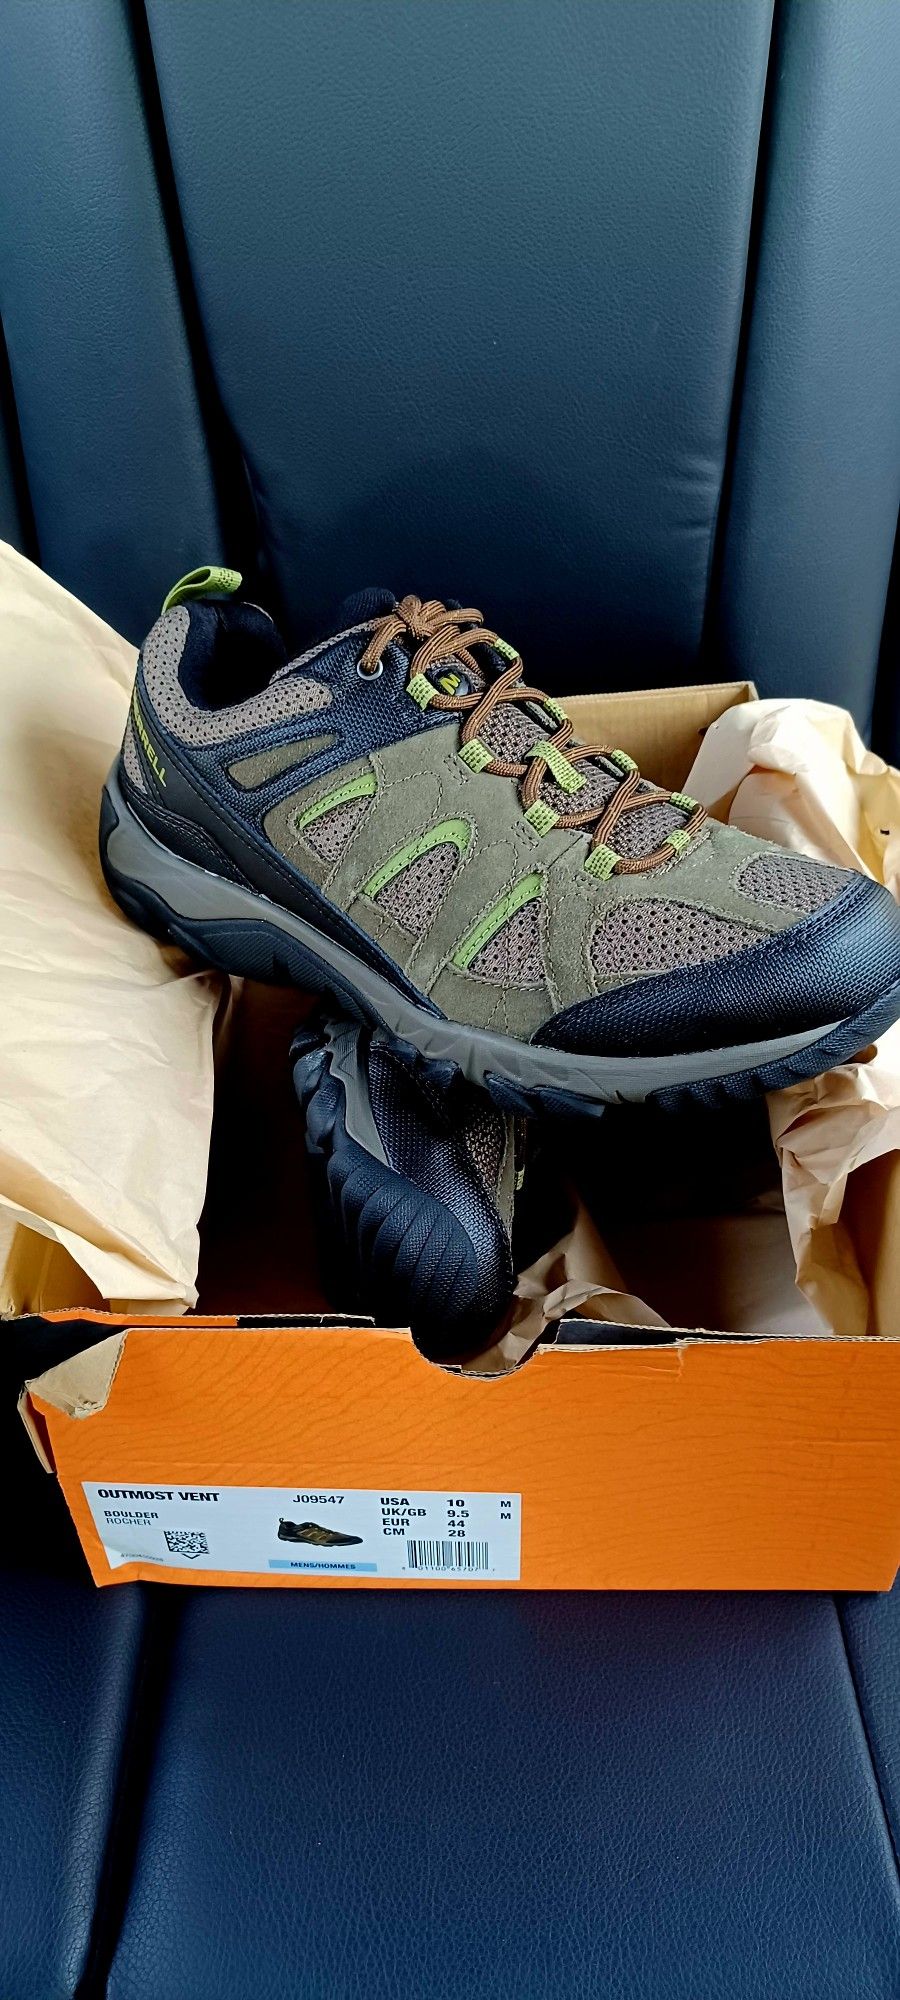 Merrell mens Outmost Vent hiking boots